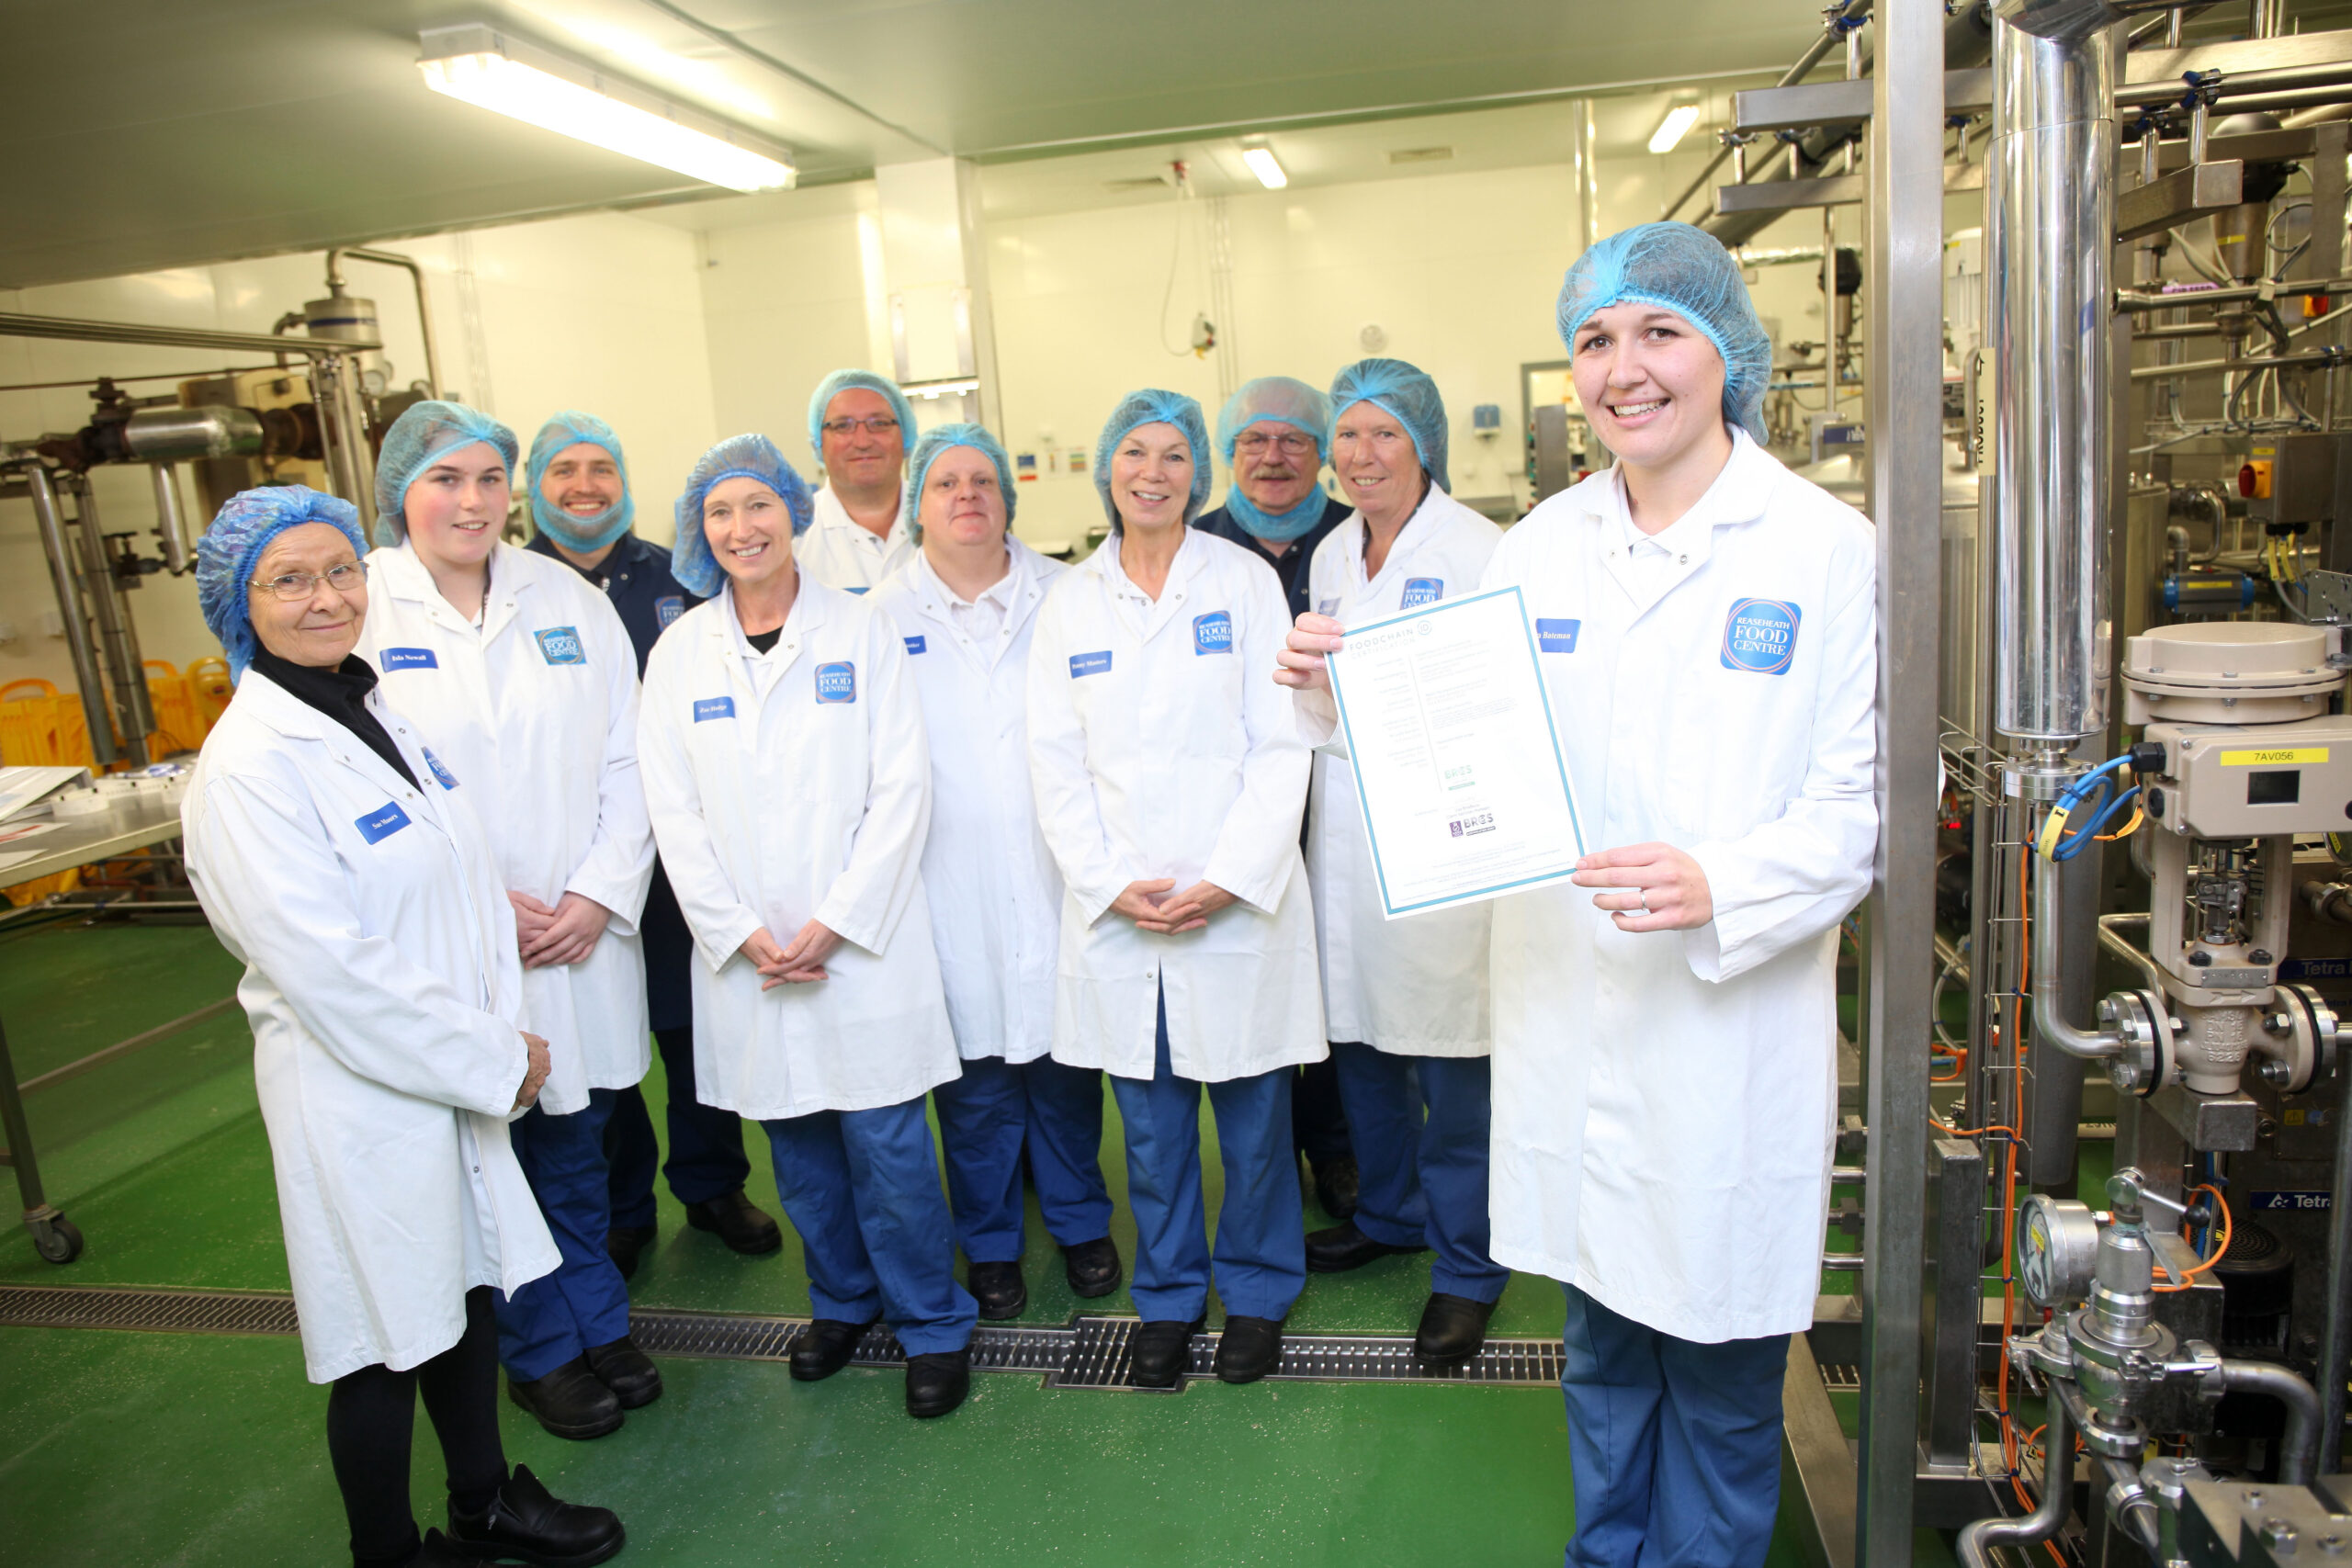 Fifth industry accolade for Food Centre team